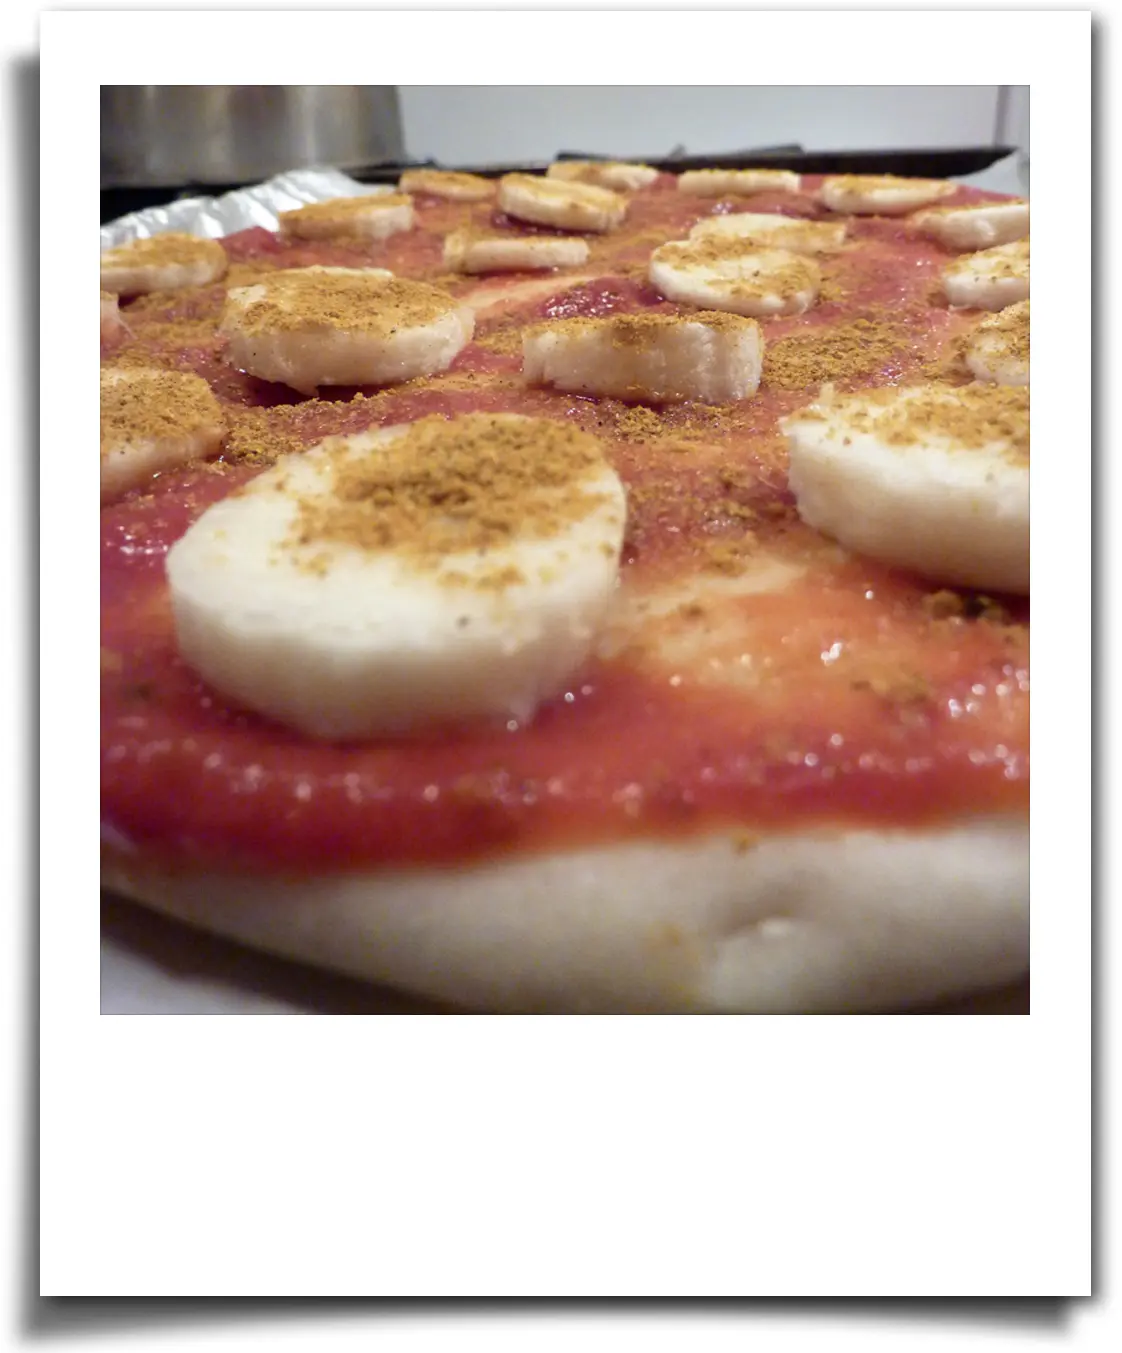 banana curry pizza sweden - What is Sweden's traditional pizza